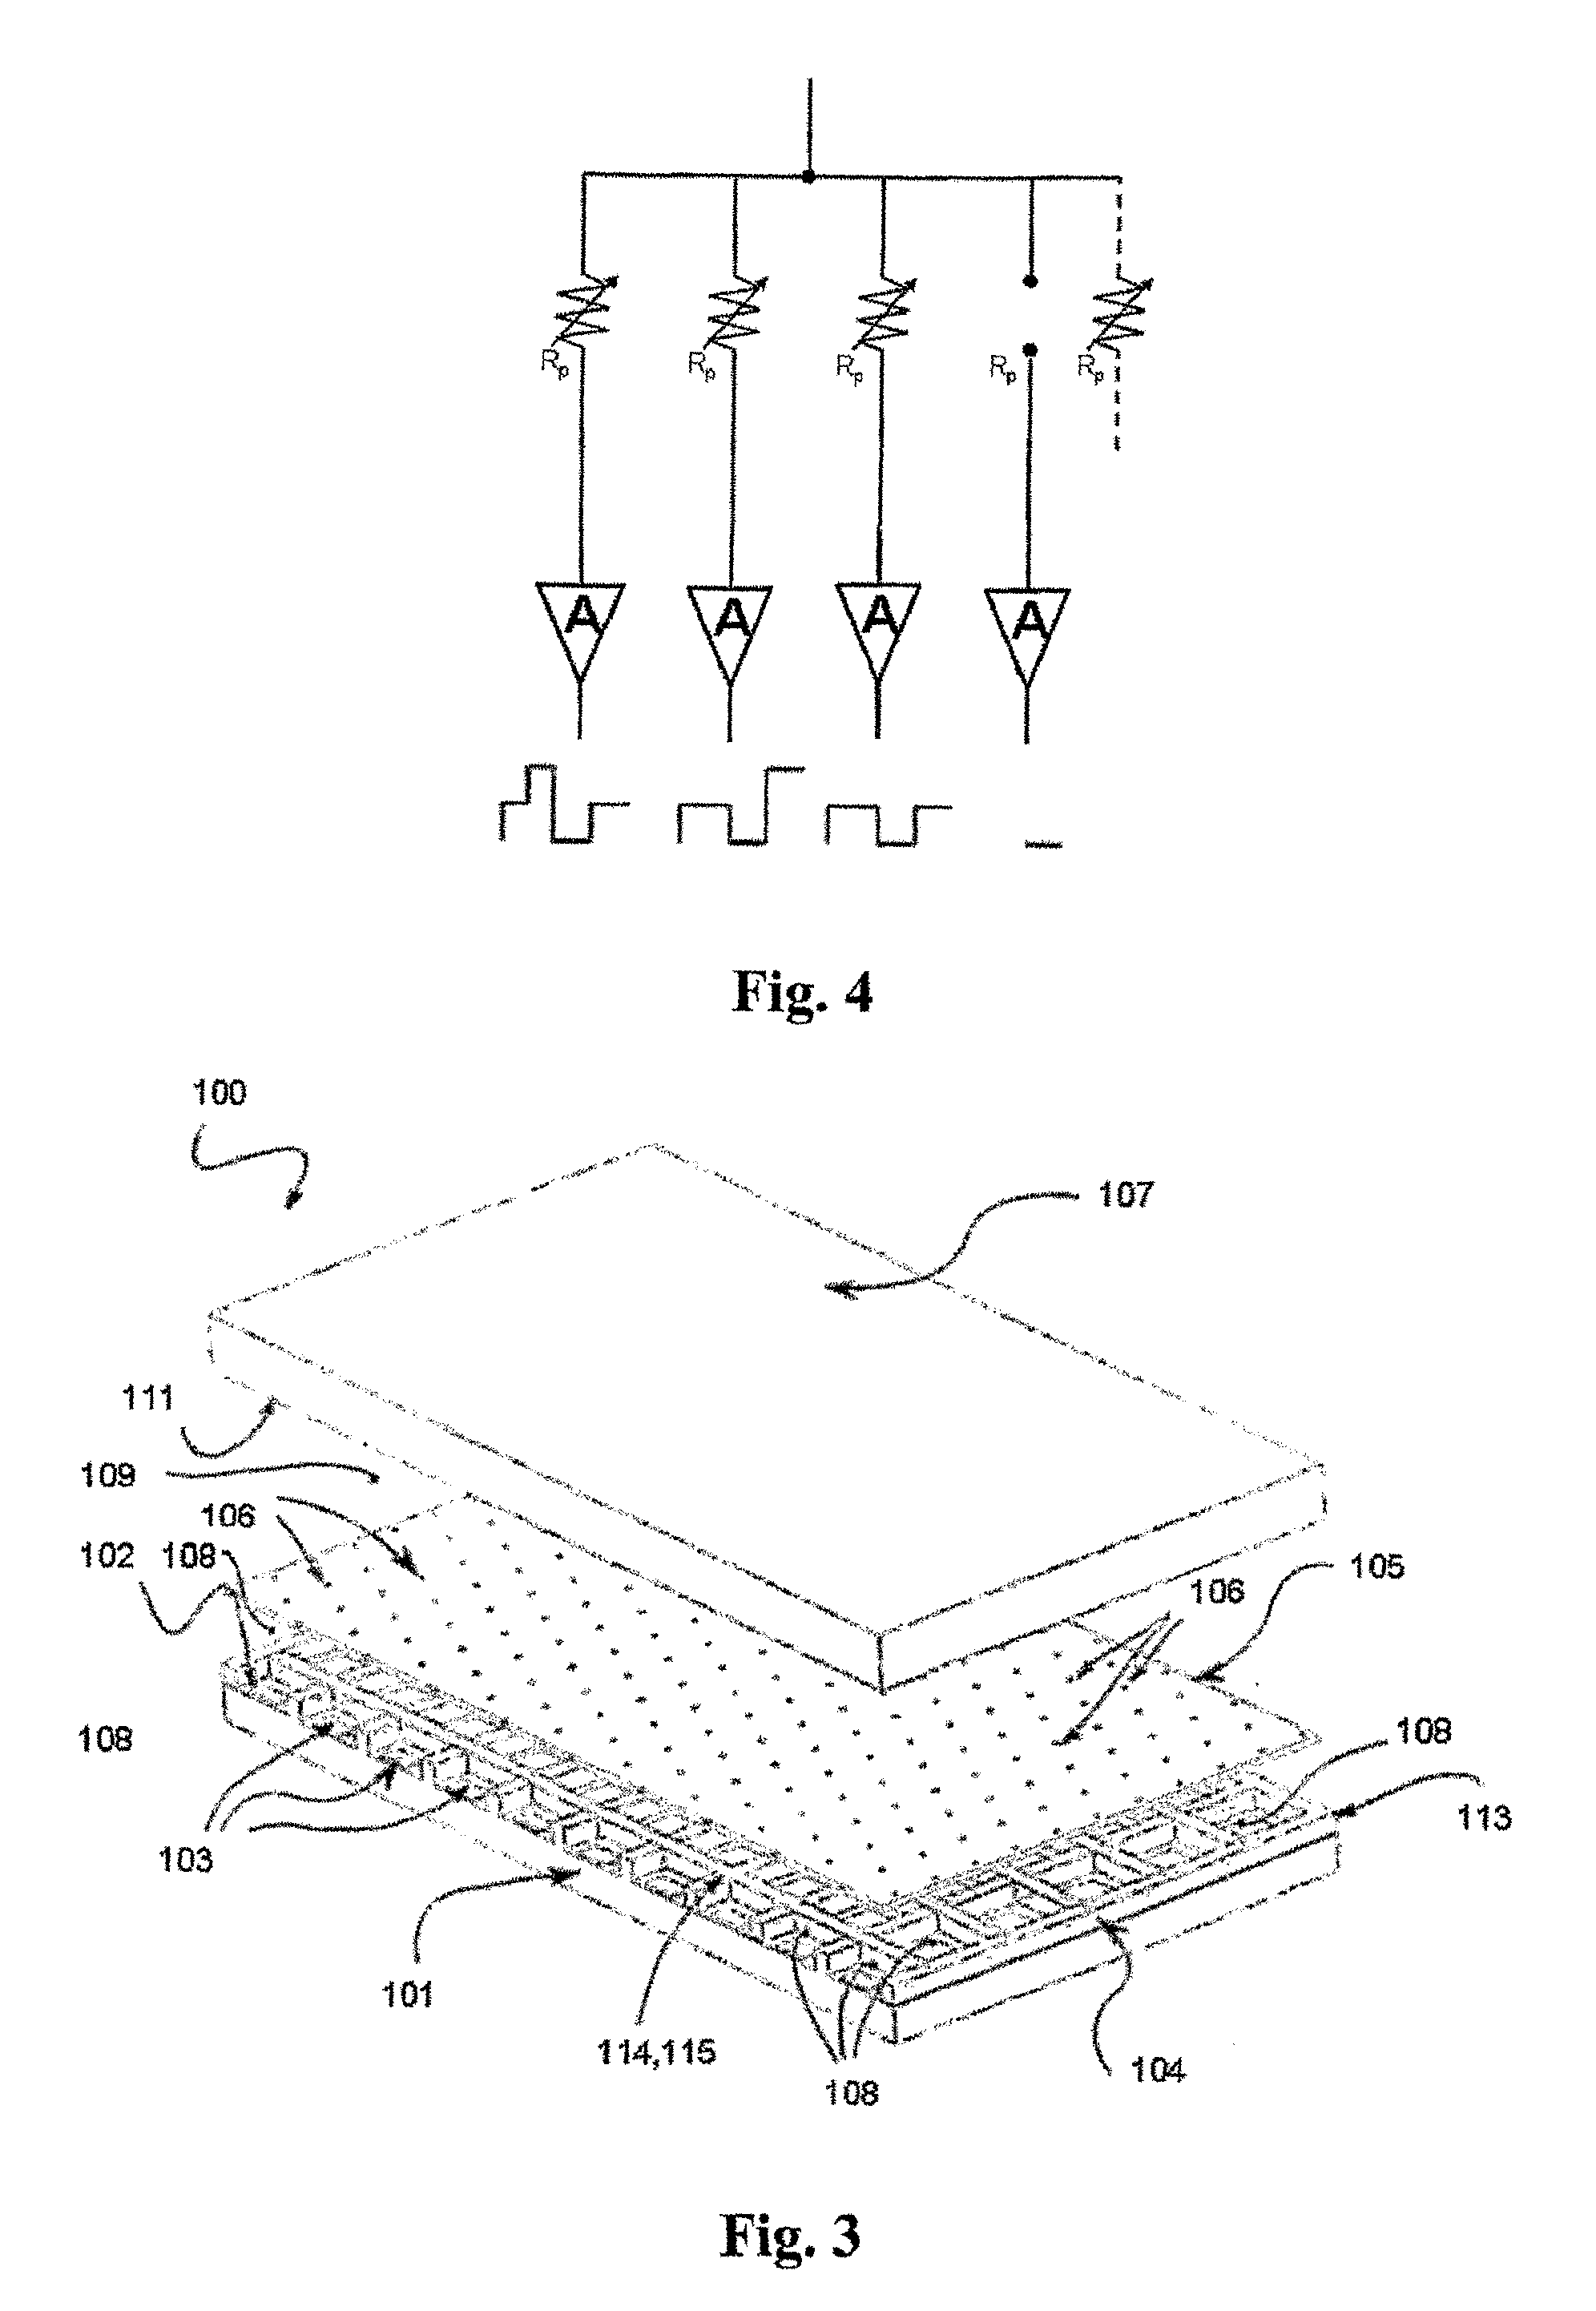 Apparatus and Method for Counting and Identifying Particles of Interest in a Fluid